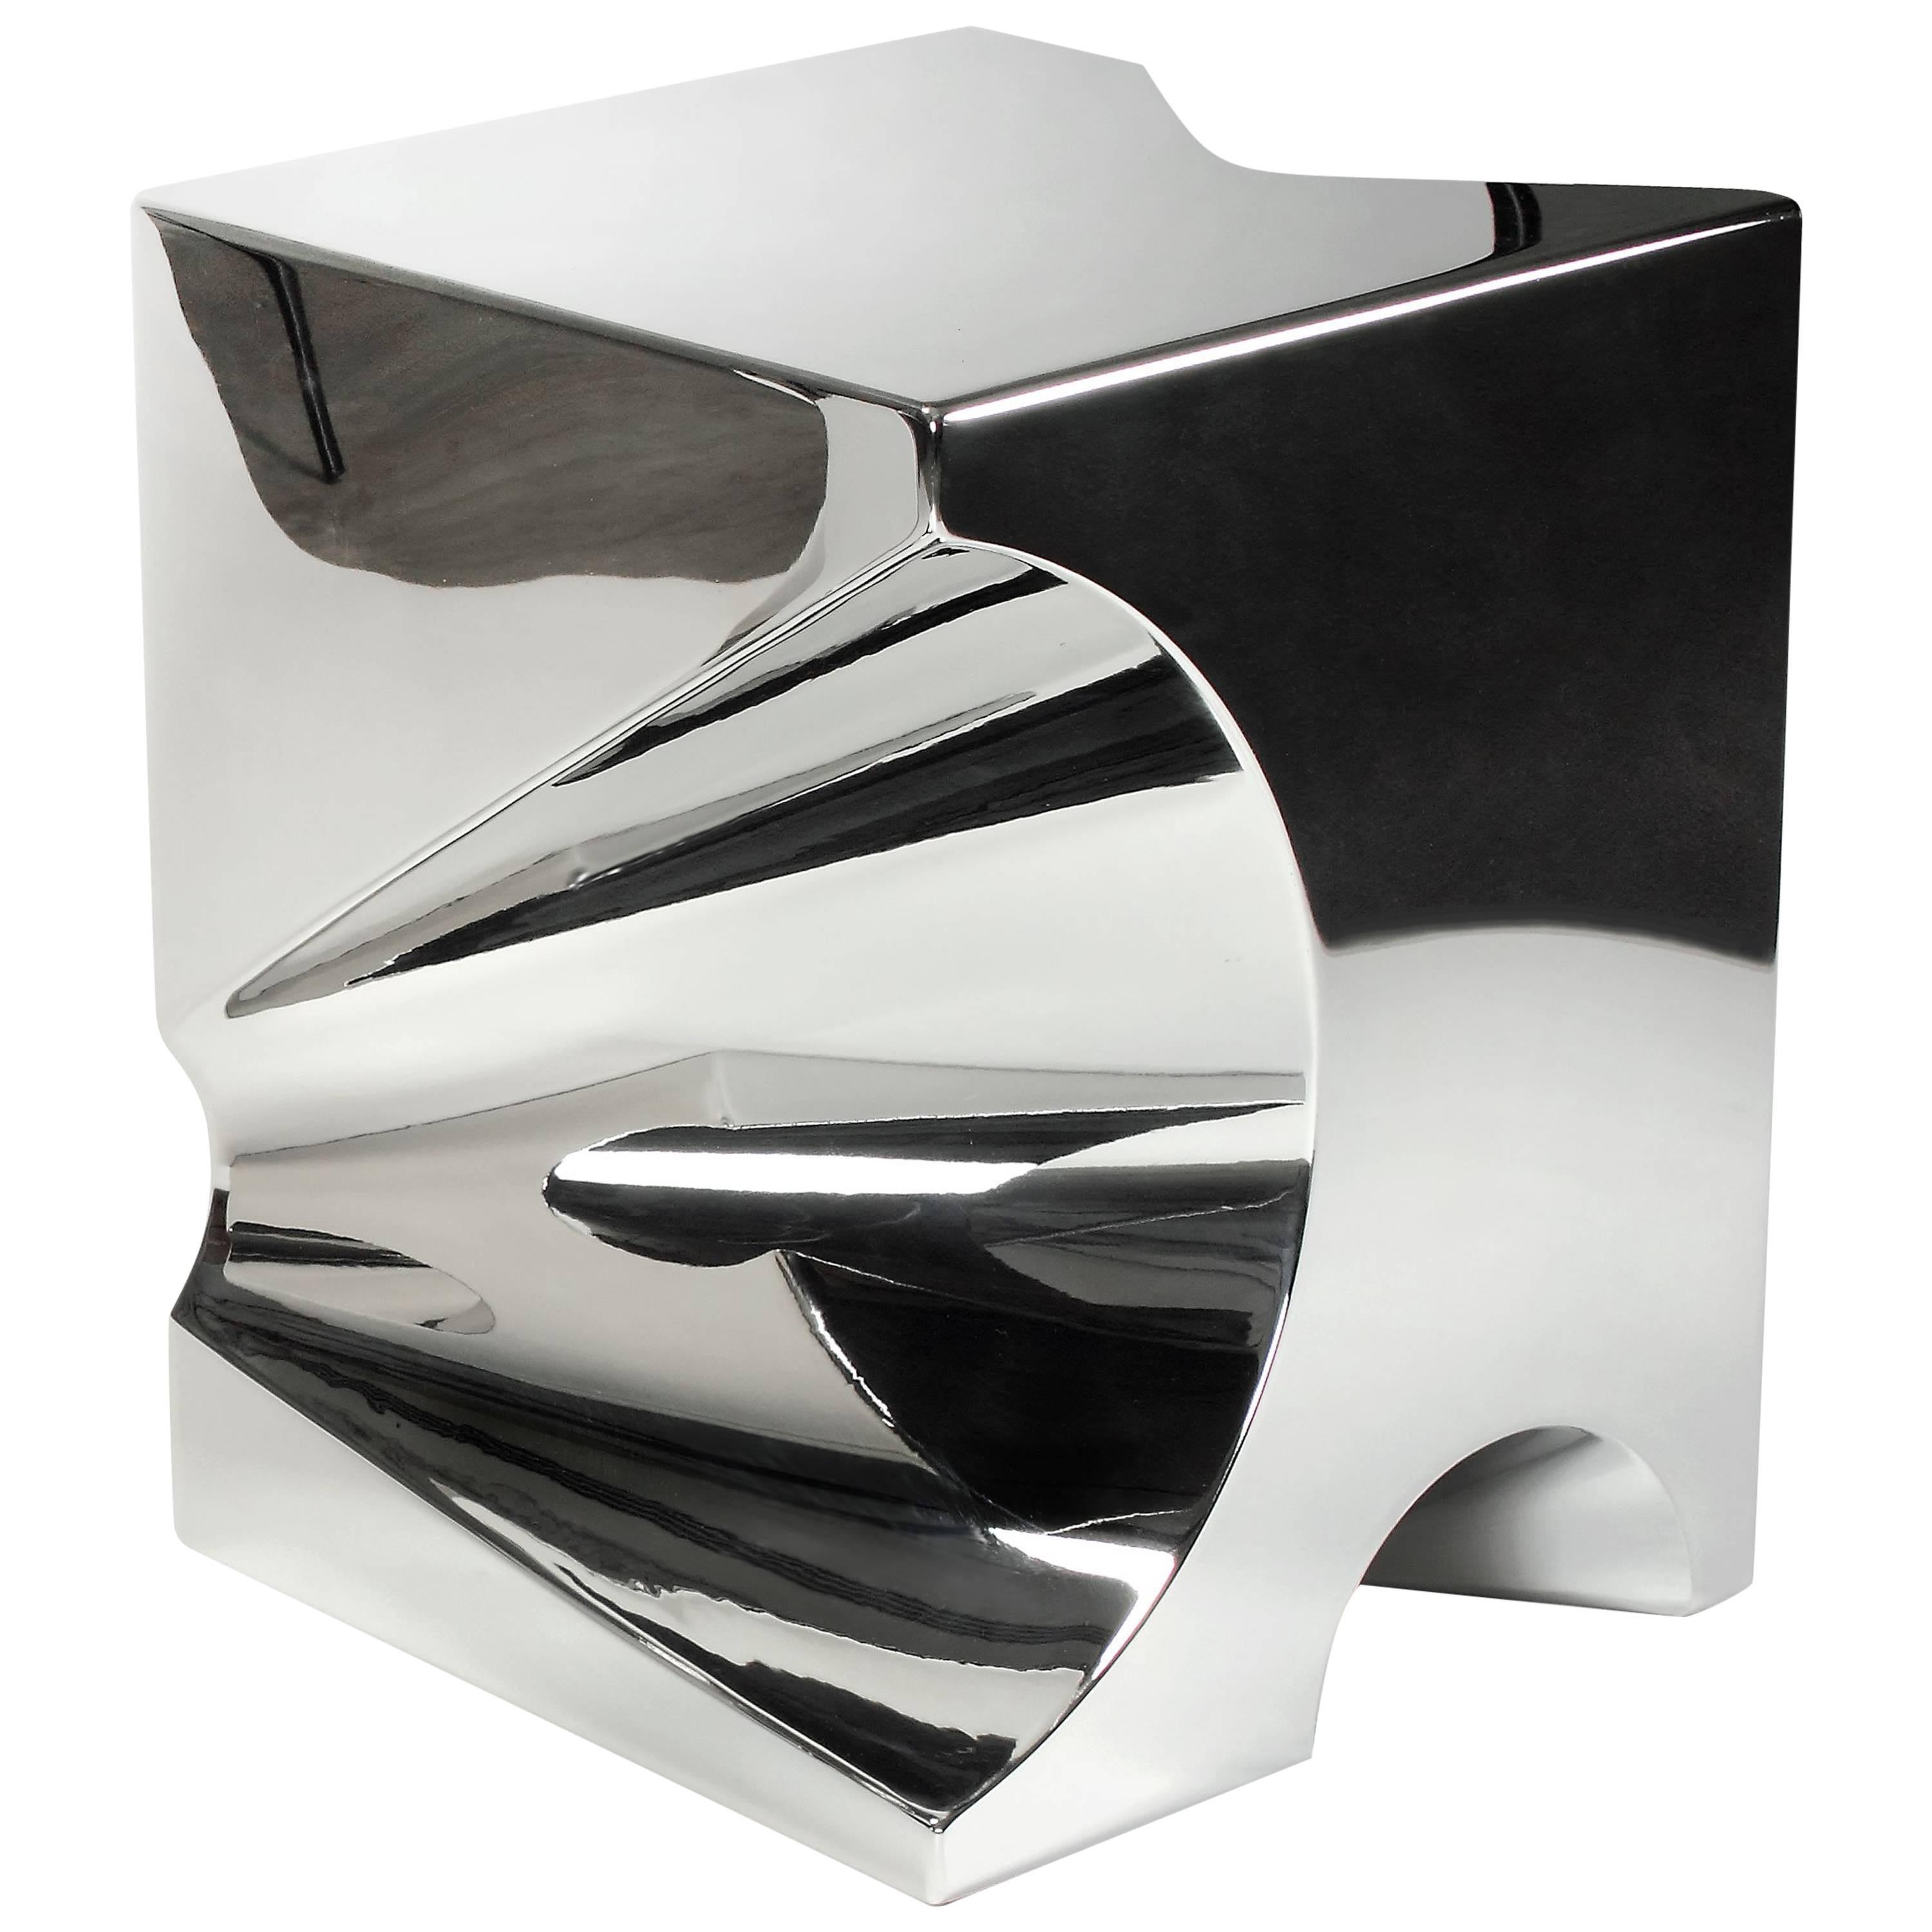 Table d'appoint au design Contemporary Sculpture en acier inoxydable poli Made in Italy